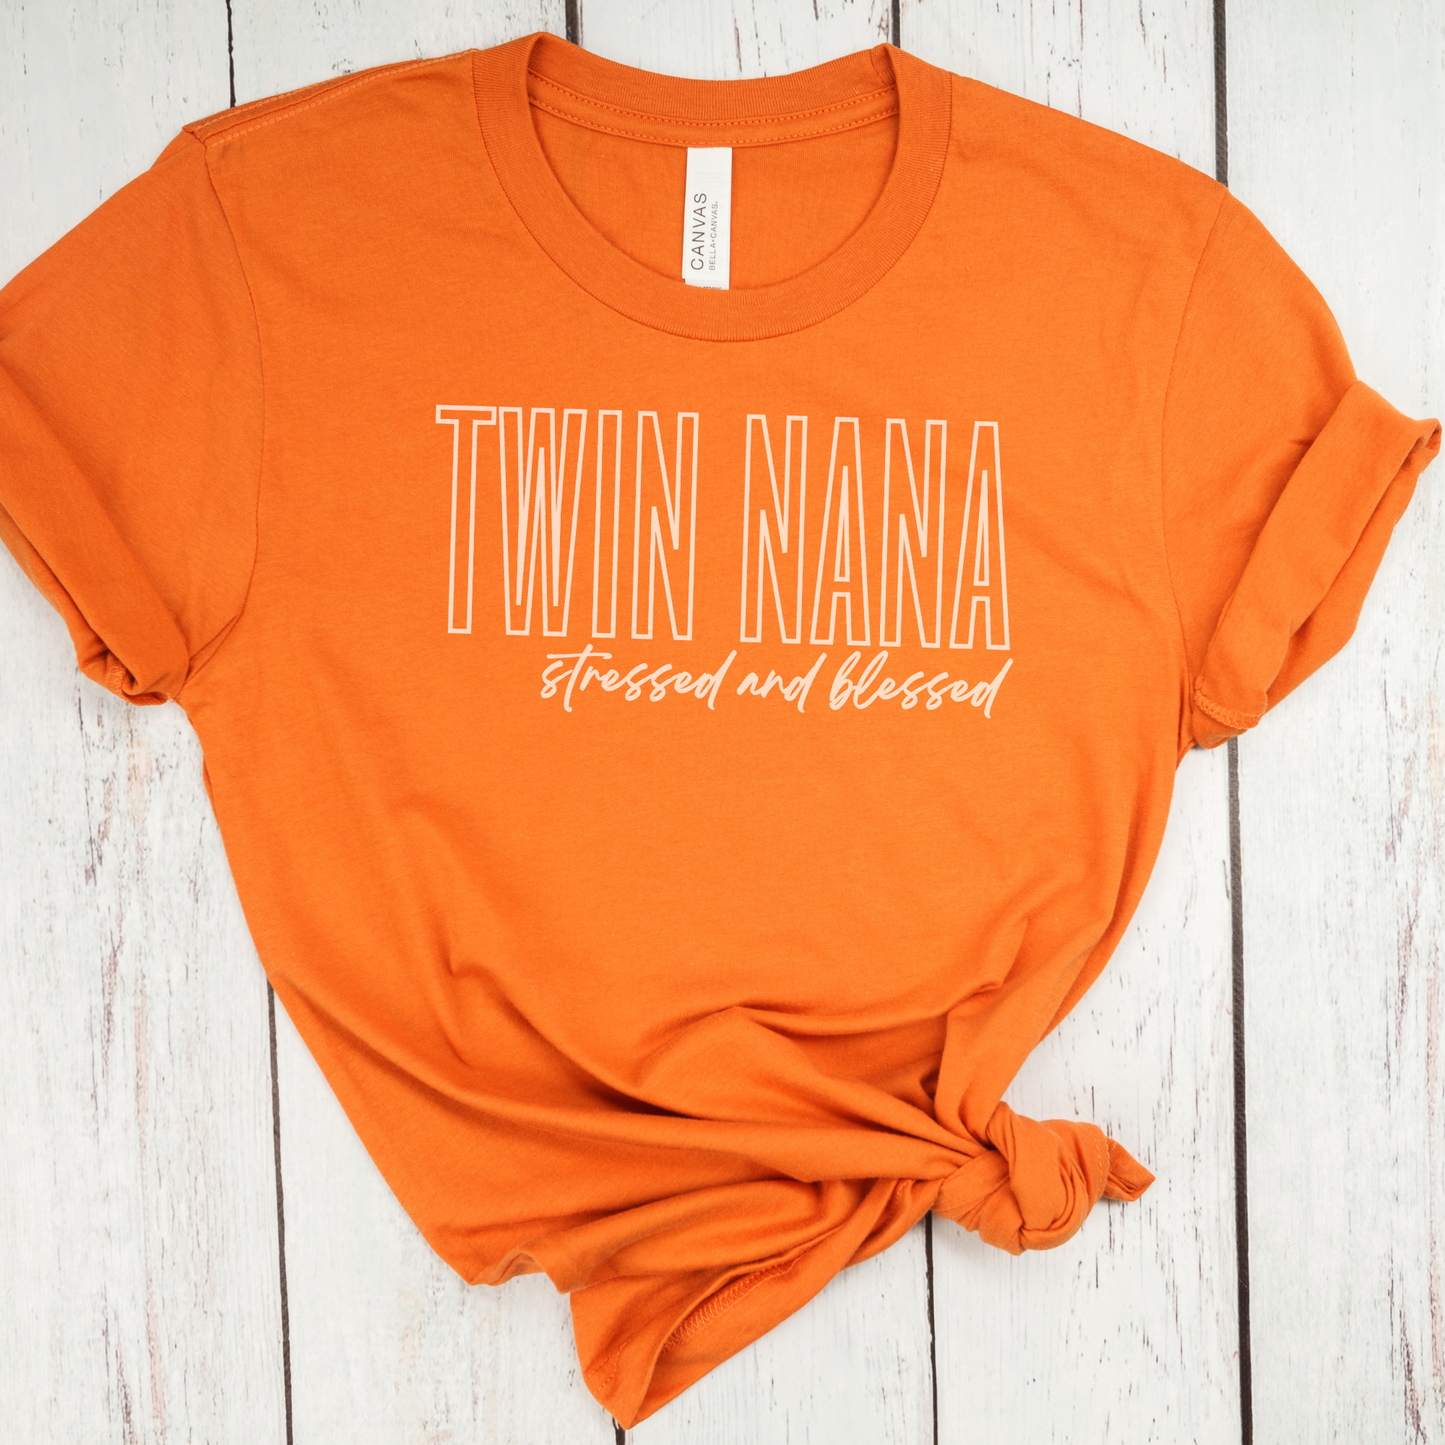 Twin Nana Stressed and Blessed White Block Hollow Letters Paint Style Script Unisex Jersey Short Sleeve Tee Small-3XL Multiples